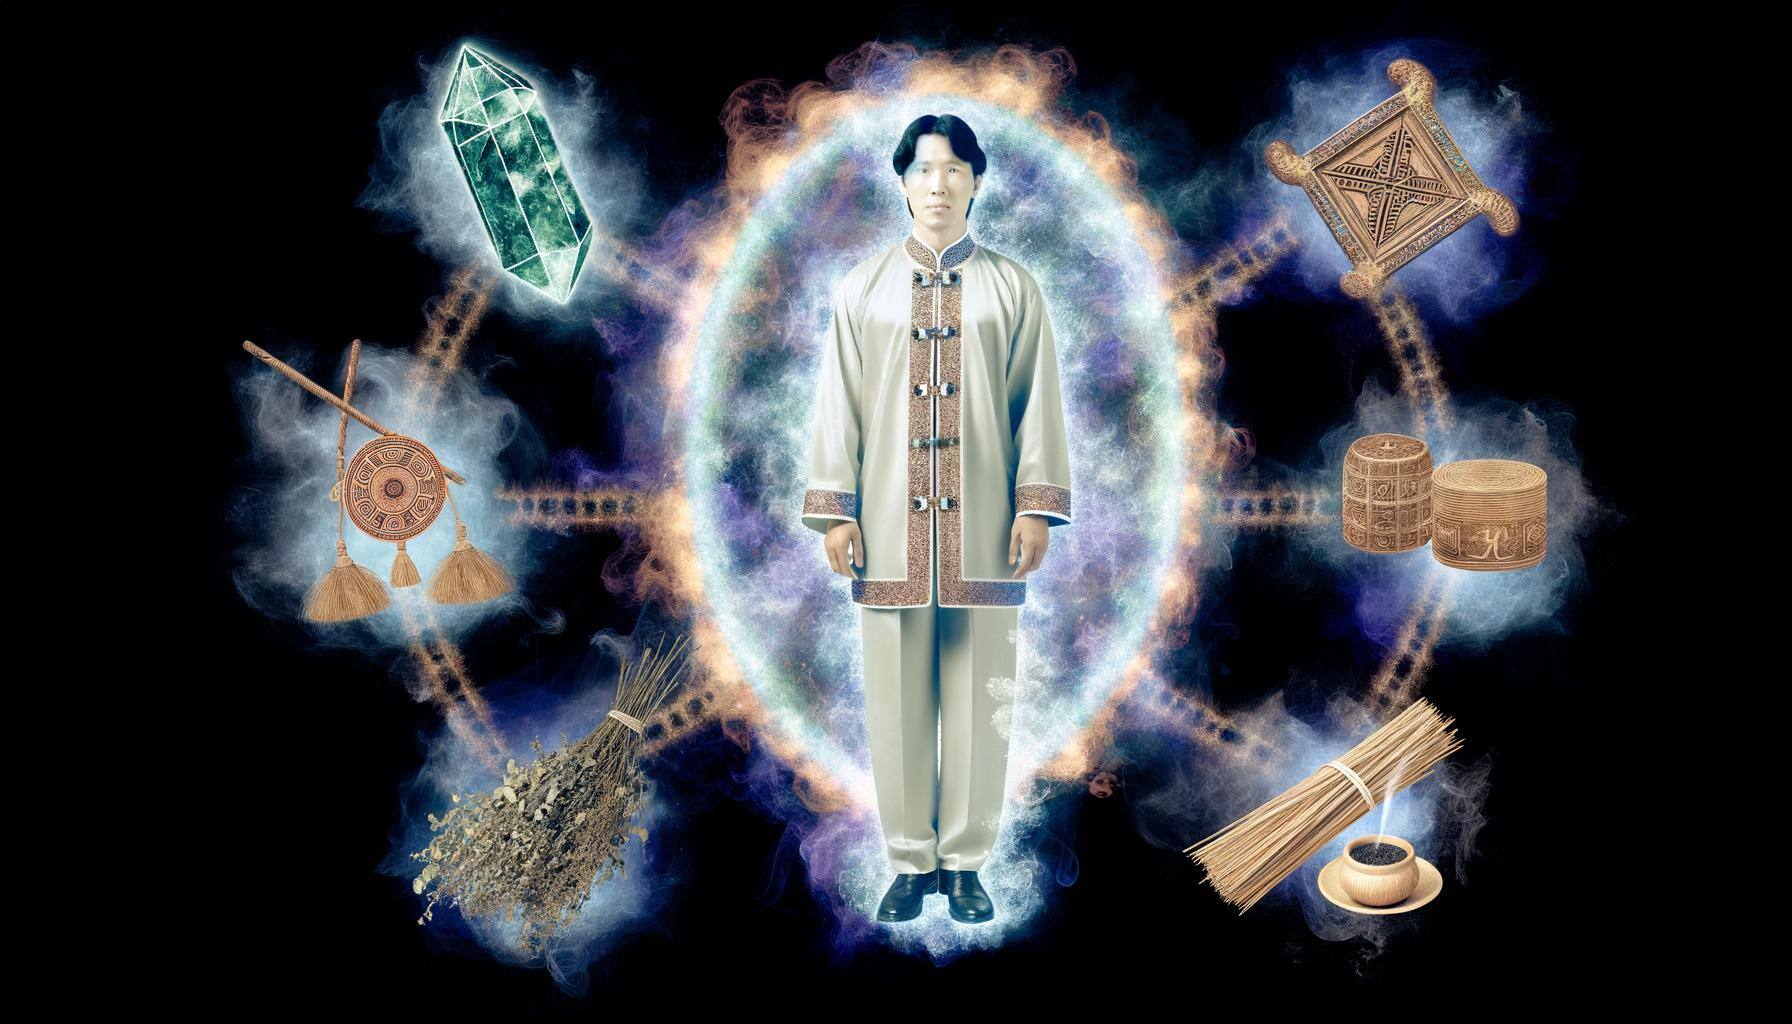 An image of a person surrounded by a glowing protective shield, with symbols of protection and cleansing rituals floating around them